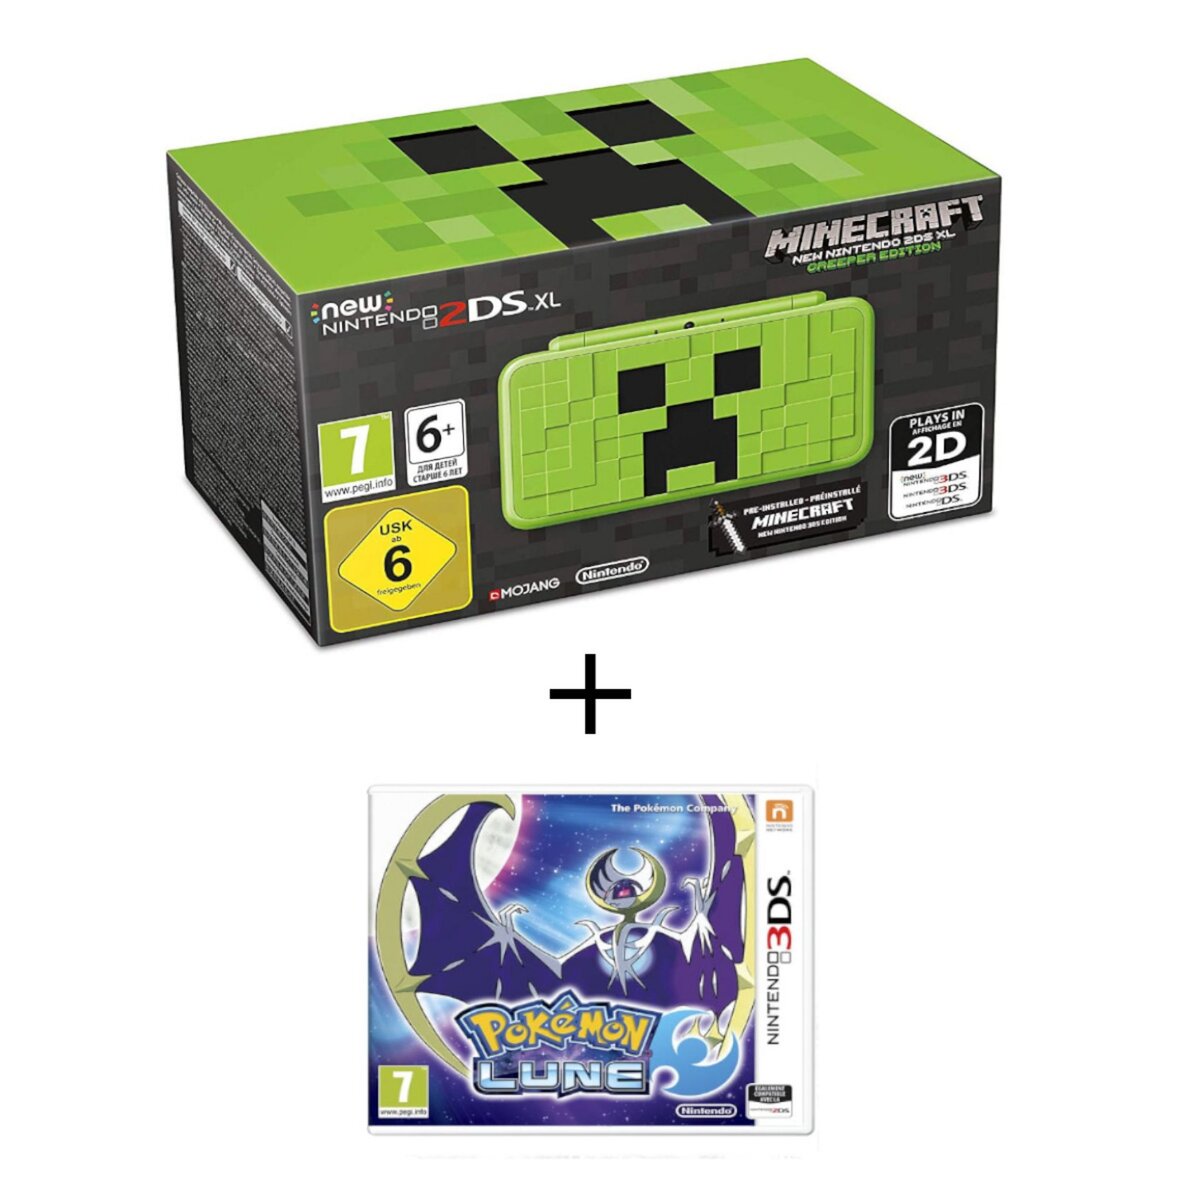 Console New 2DS XL Minecraft - Creeper Édition + Pokemon Lune 3DS